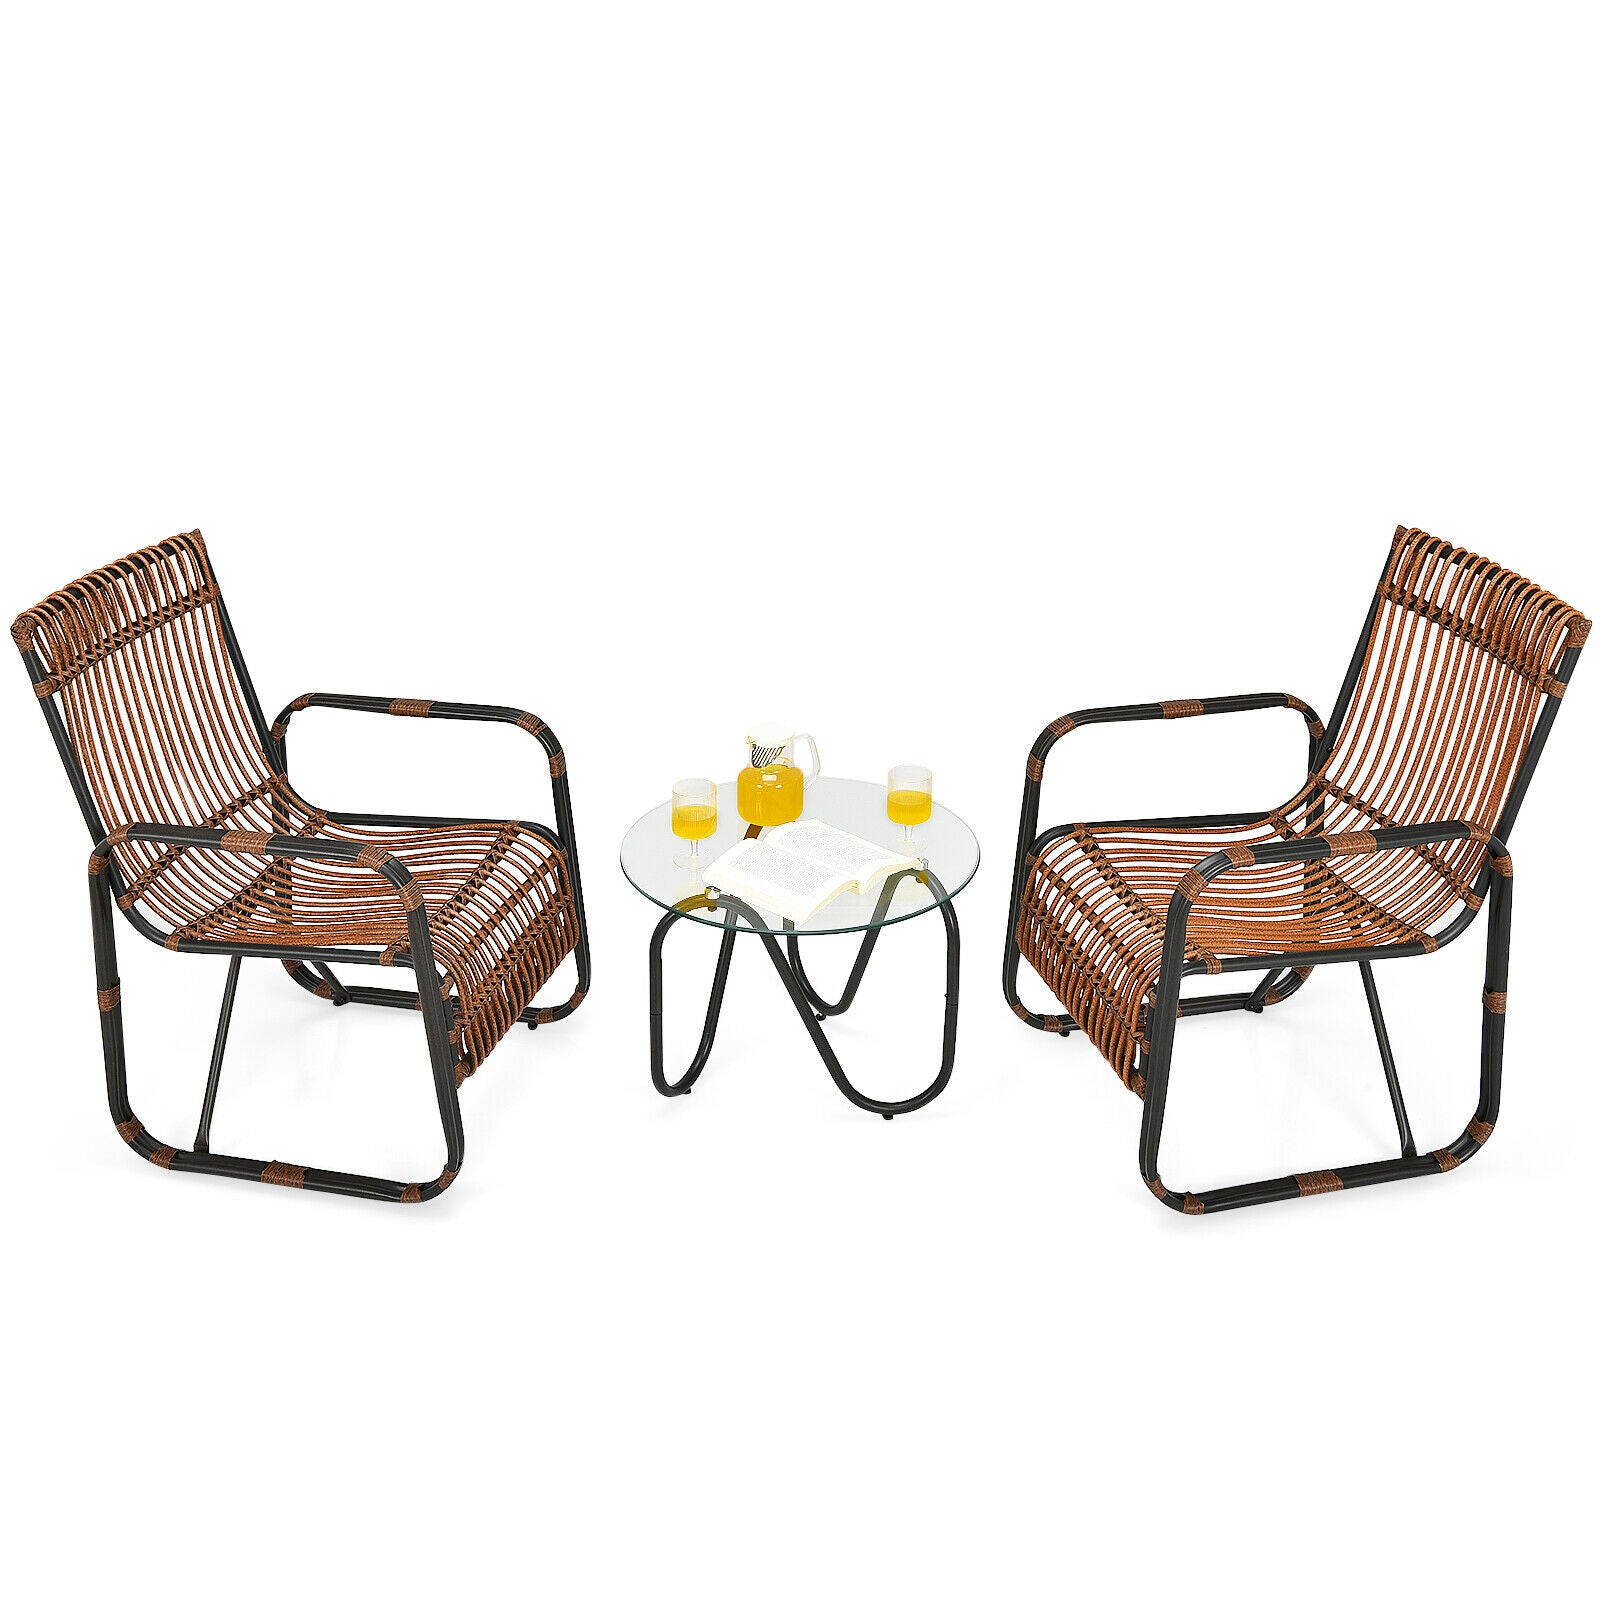 3 Piece Rattan Furniture Set with 2 Armchairs and Glass Coffee Table